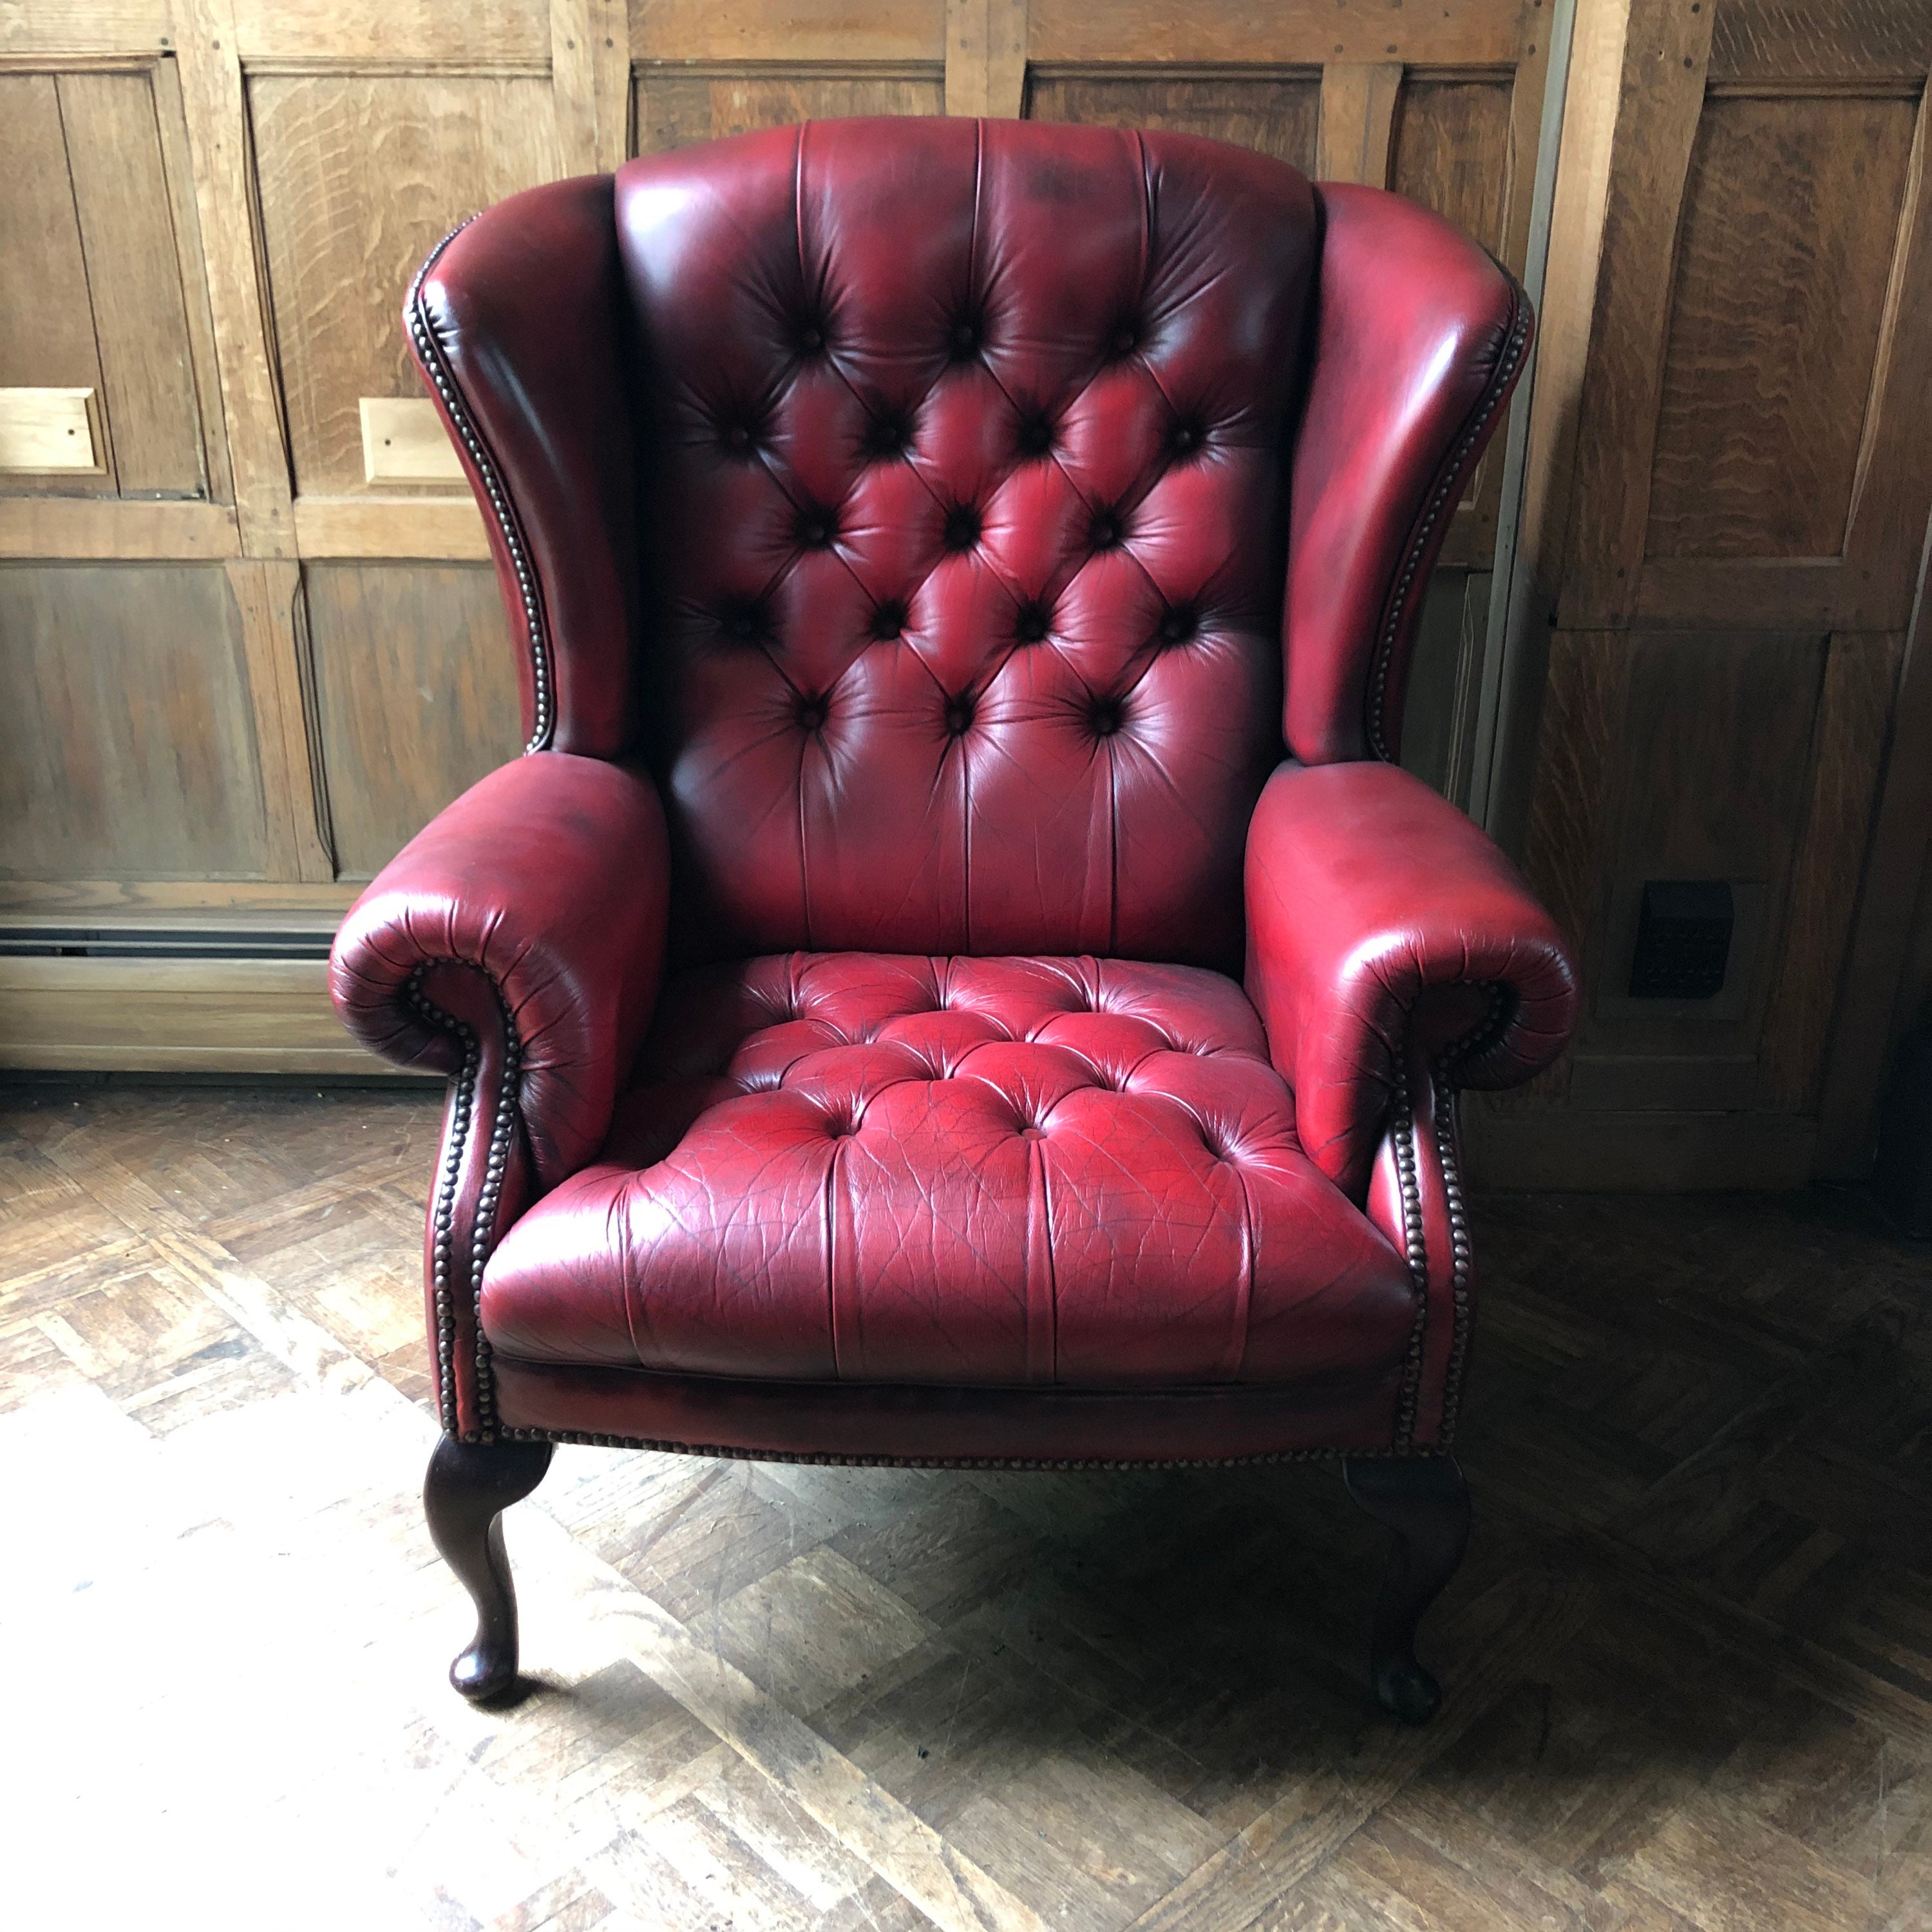 RESERVED - Vintage Leather Chair and Ottoman, Red Leather ...